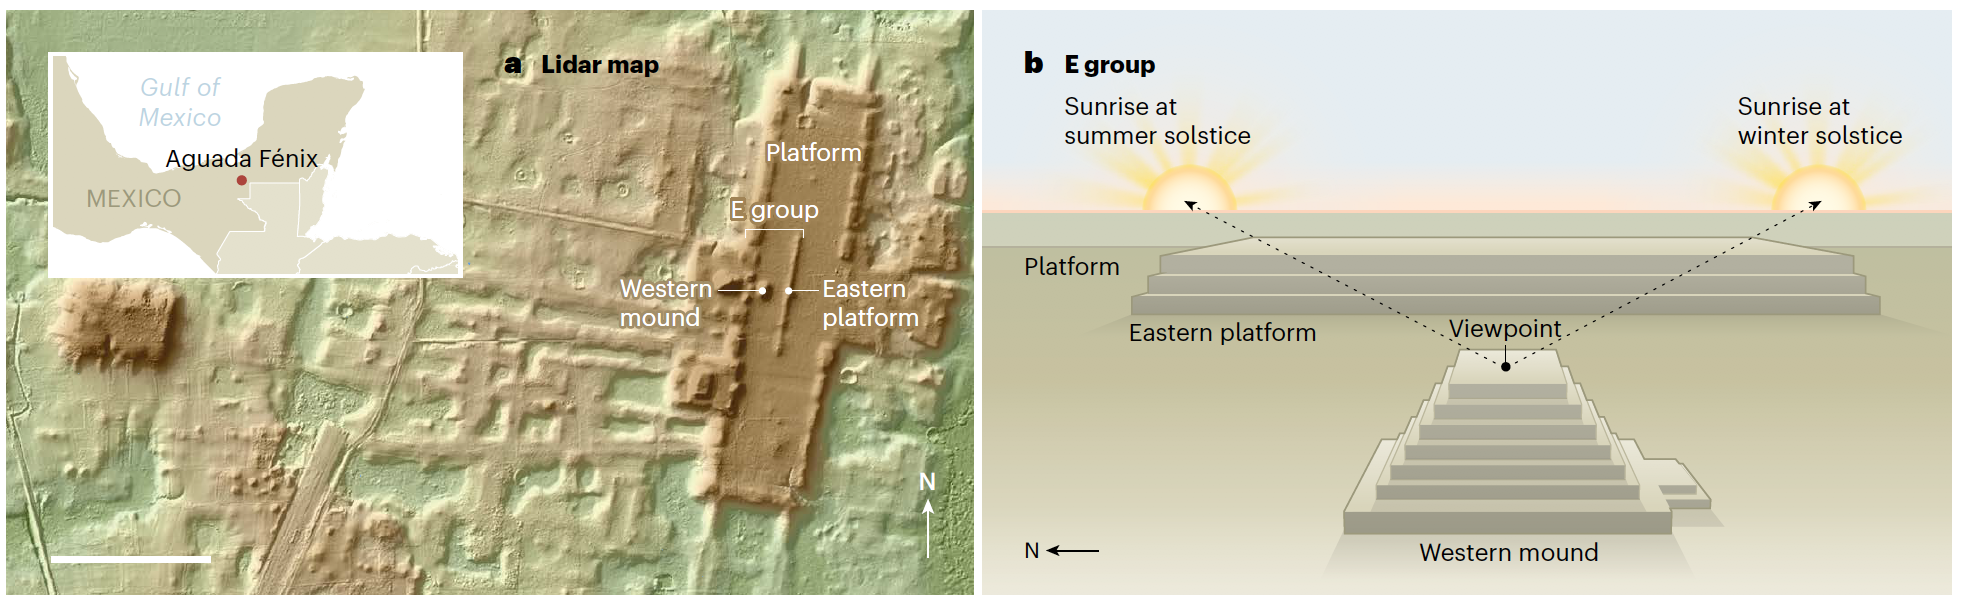 Left: 3D map created with lidar data. Right: Illustration showing the monumental structure and how it was likely used.  (Image: Nature News & Views)